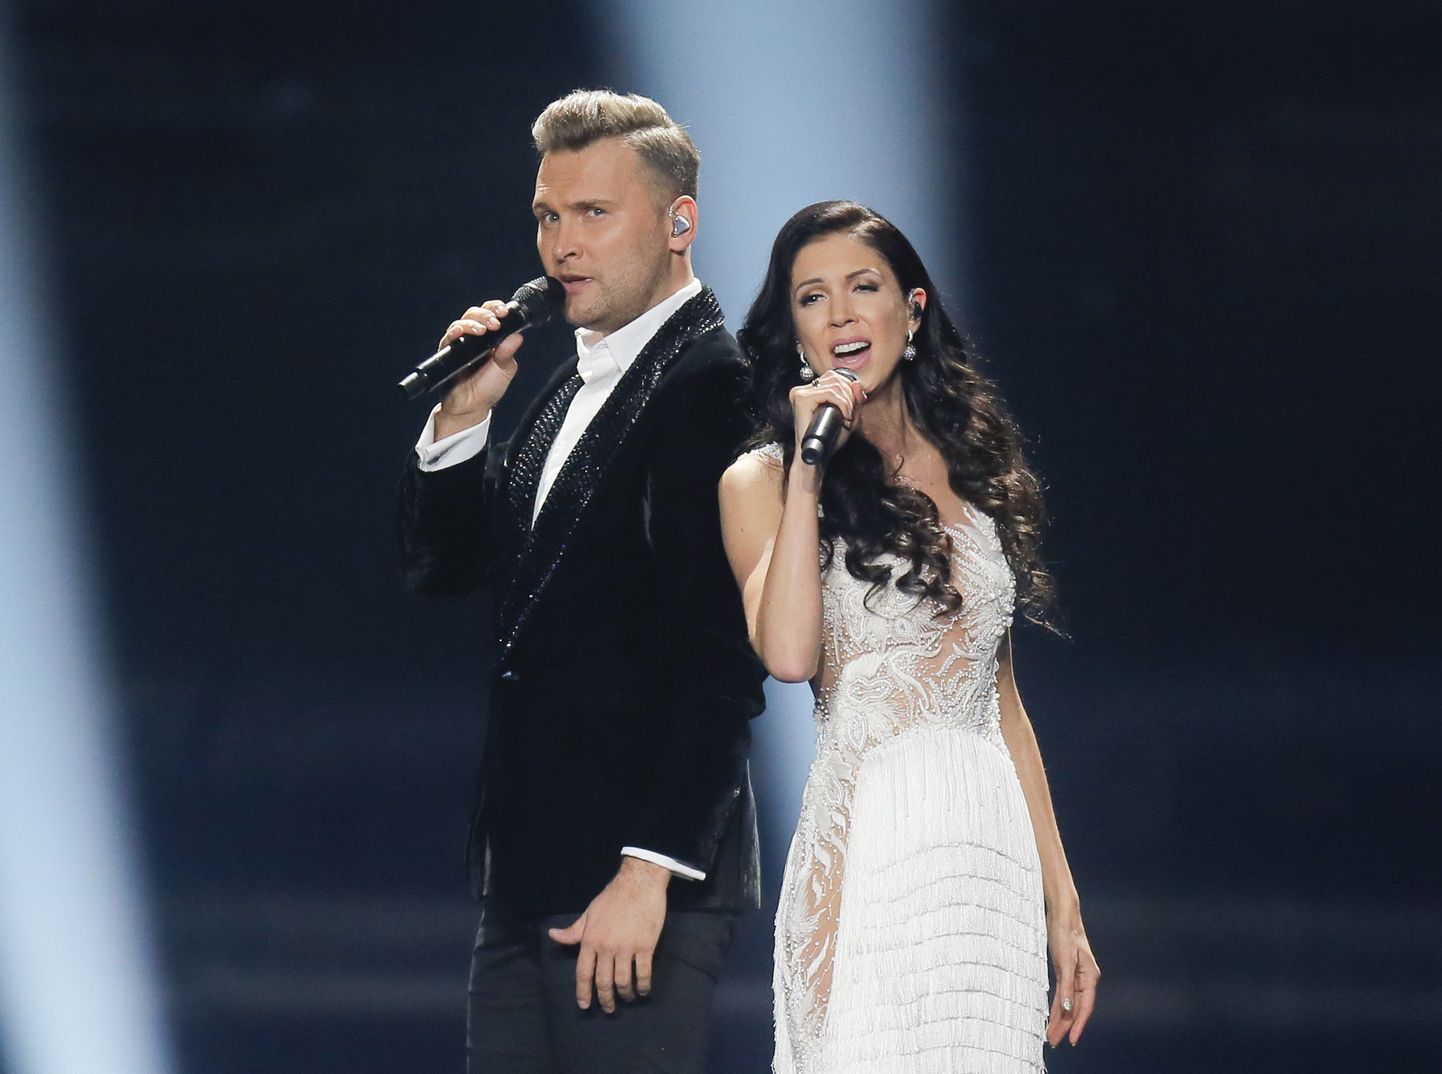 Estonia's Koit Toome and Laura performs the song "Verona" during rehearsals for the Eurovision Song Contest, in Kiev, Ukraine, Saturday, May 6, 2017. The first semi final of The Eurovision Song Contest 2017 will be held on May 9. (AP Photo/Efrem Lukatsky)